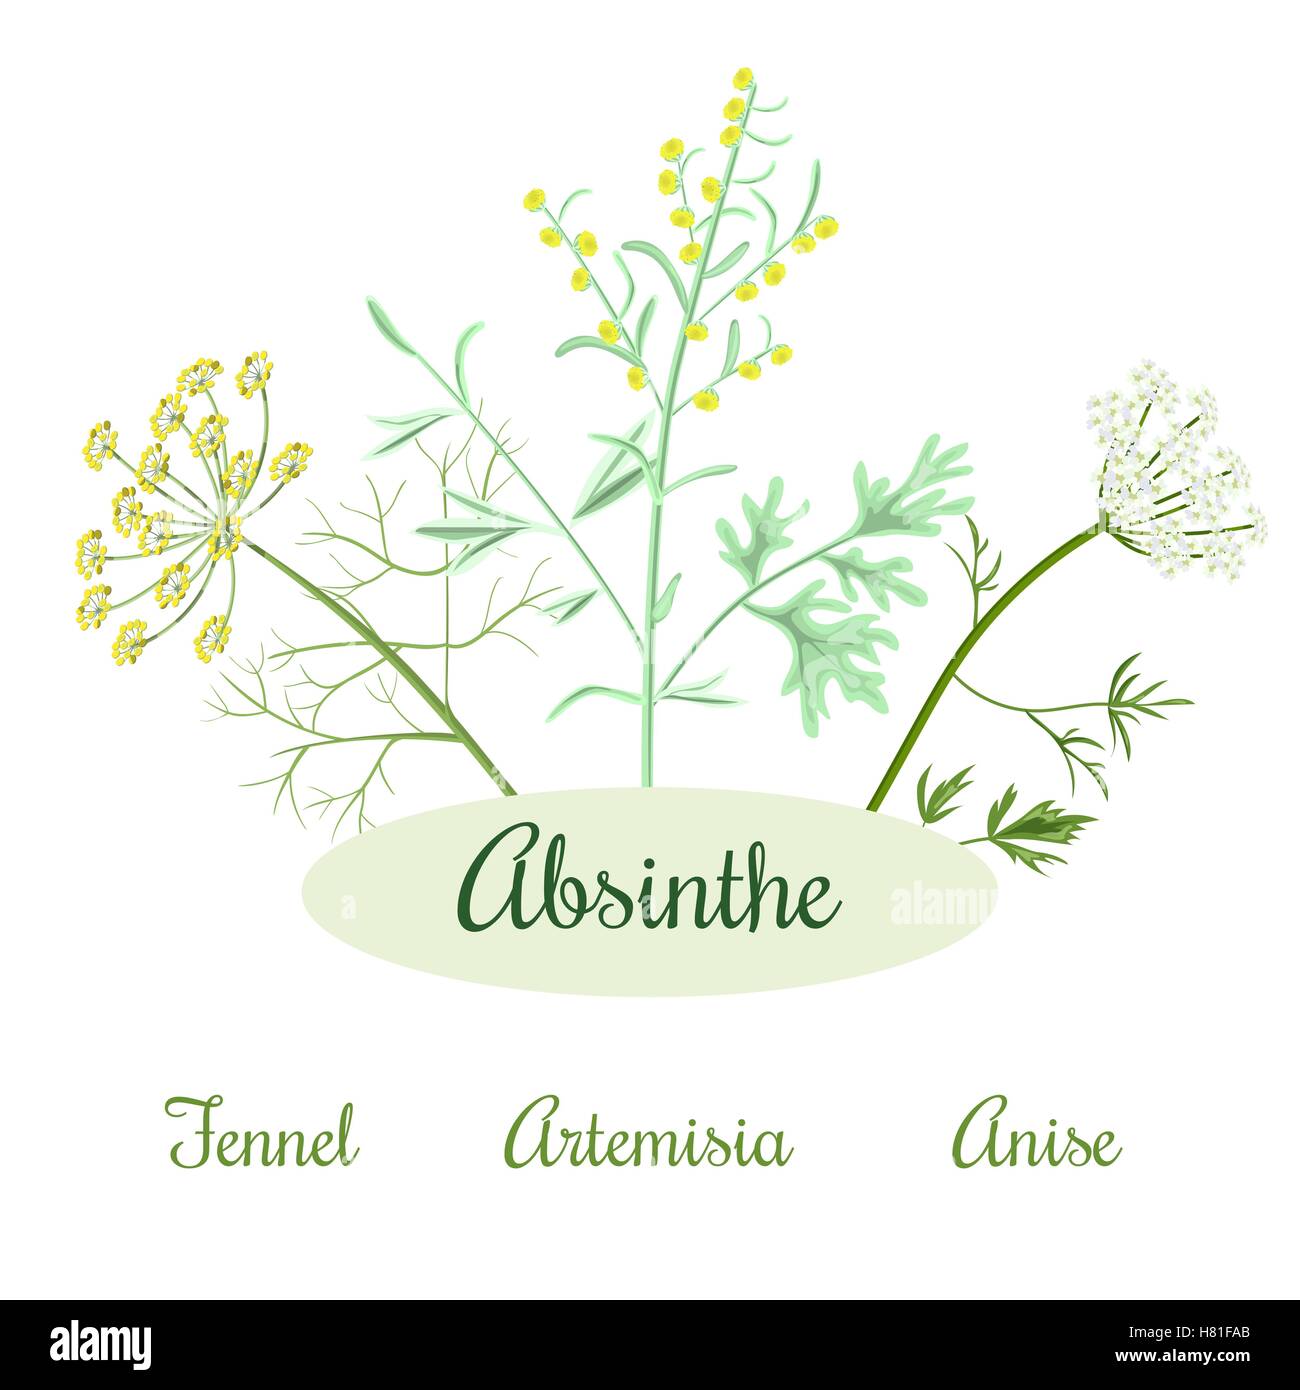 Absinthe ingredients. Grand wormwood or Artemisia absinthium , green anise or Pimpinella anisum, sweet fennel or Foeniculum vulg Stock Vector